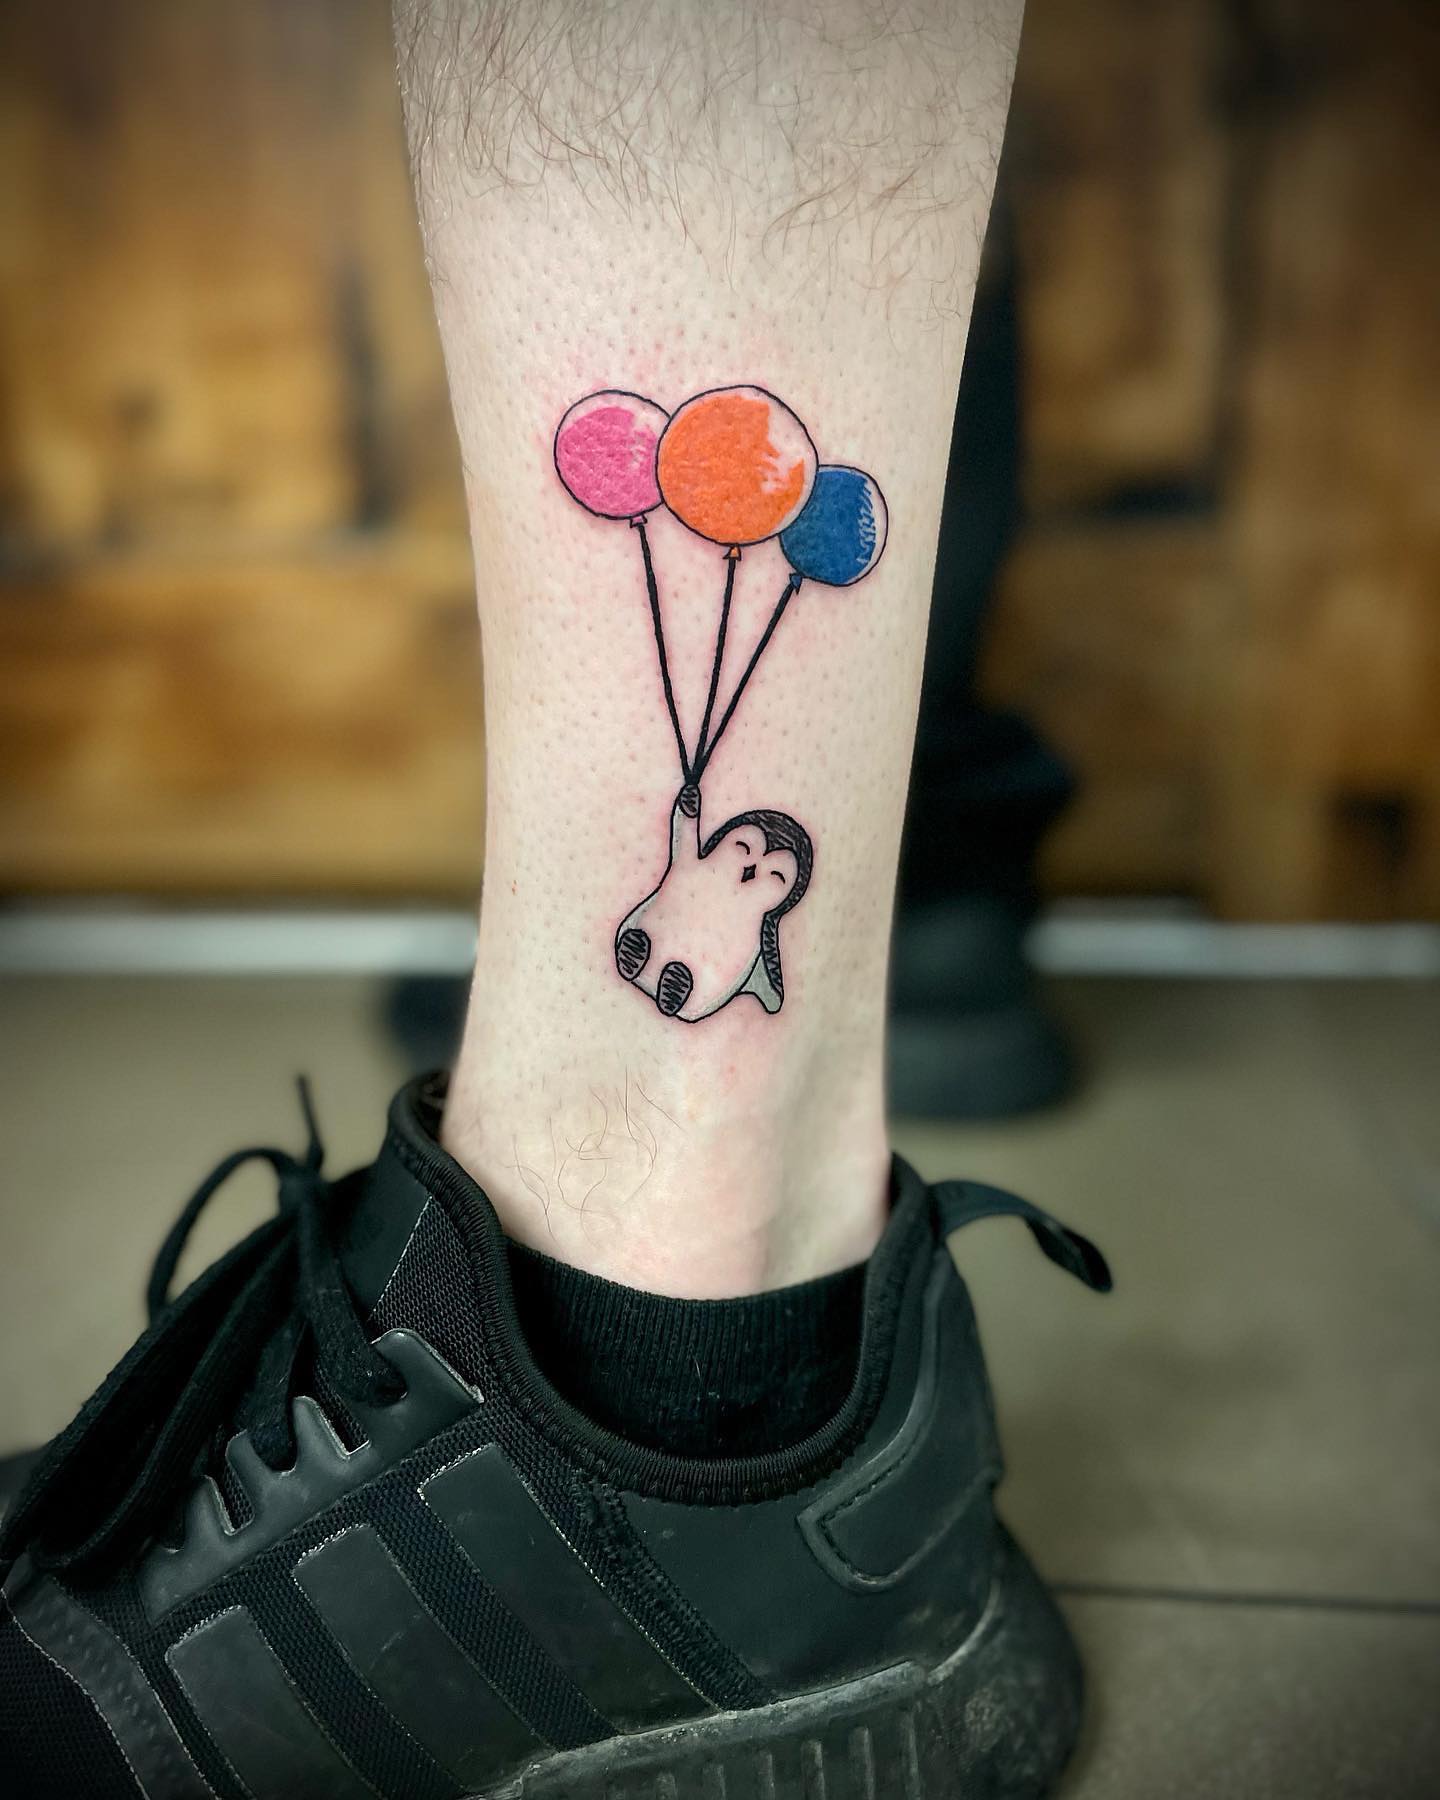 In this tattoo design, the penguin holds some colorful balloons and it seems like it is enjoying them a lot. Maybe all you need is a cute tattoo like this.